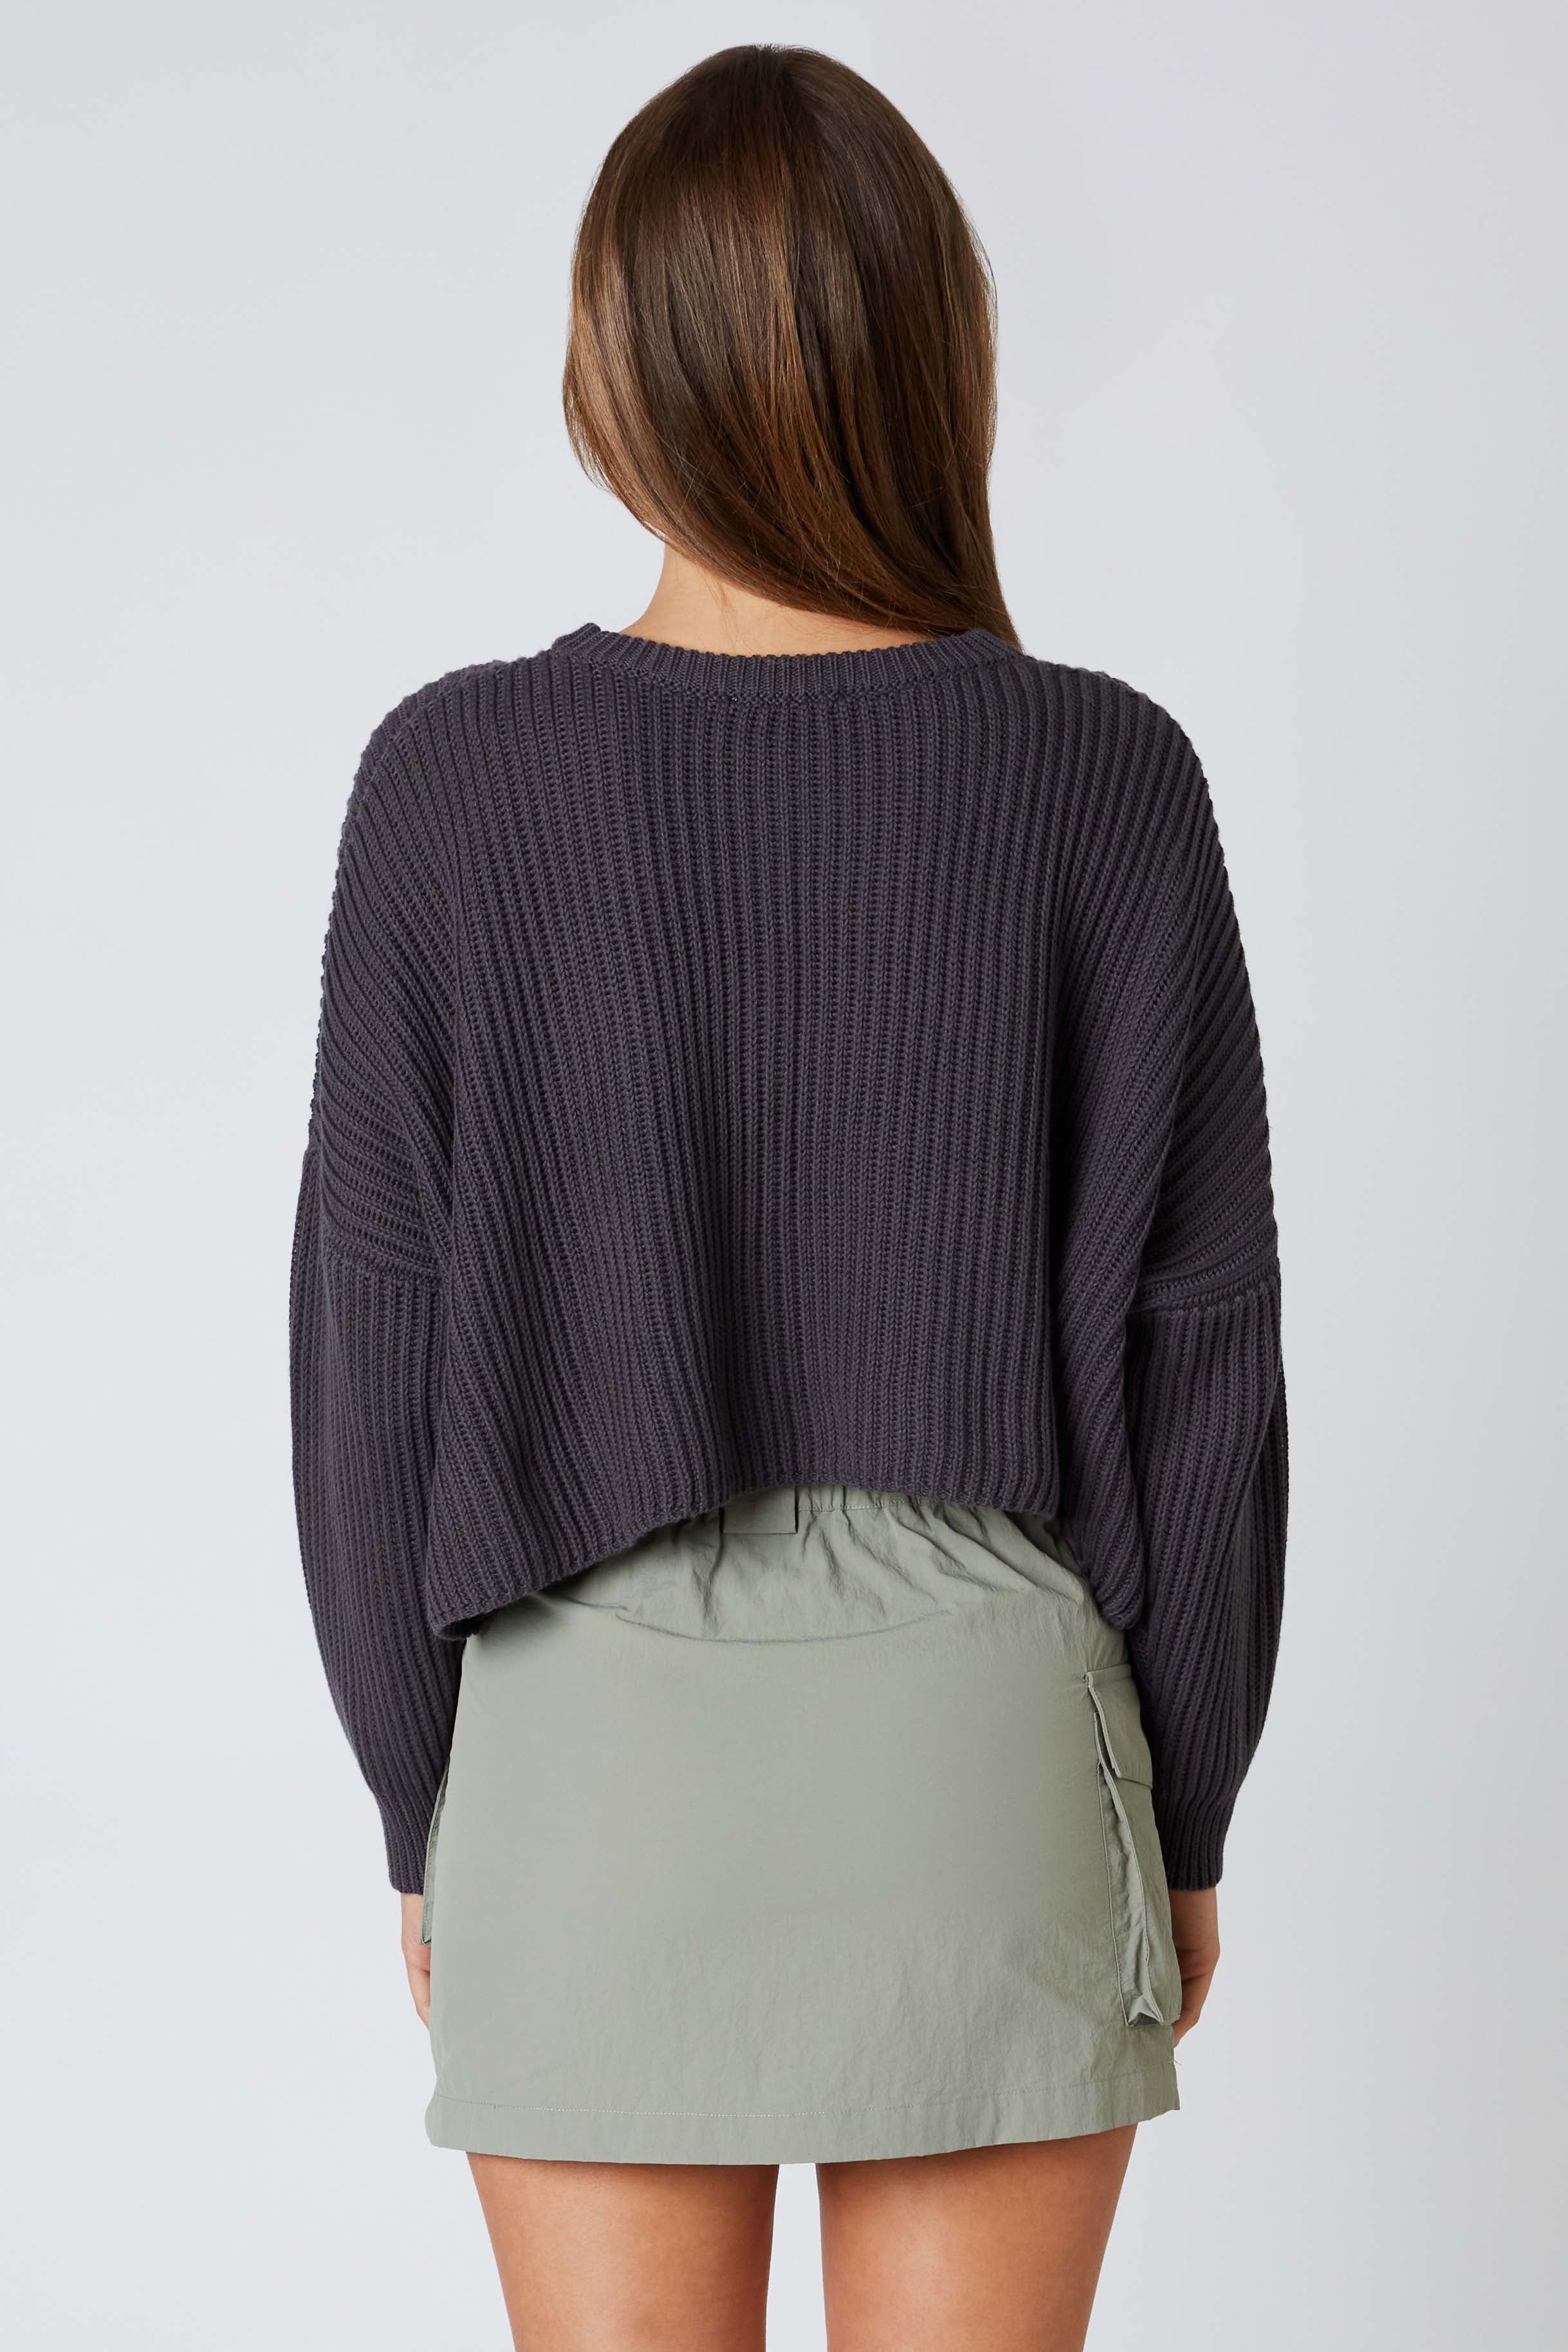 Boxy Cropped Sweater in Dark Slate Back View